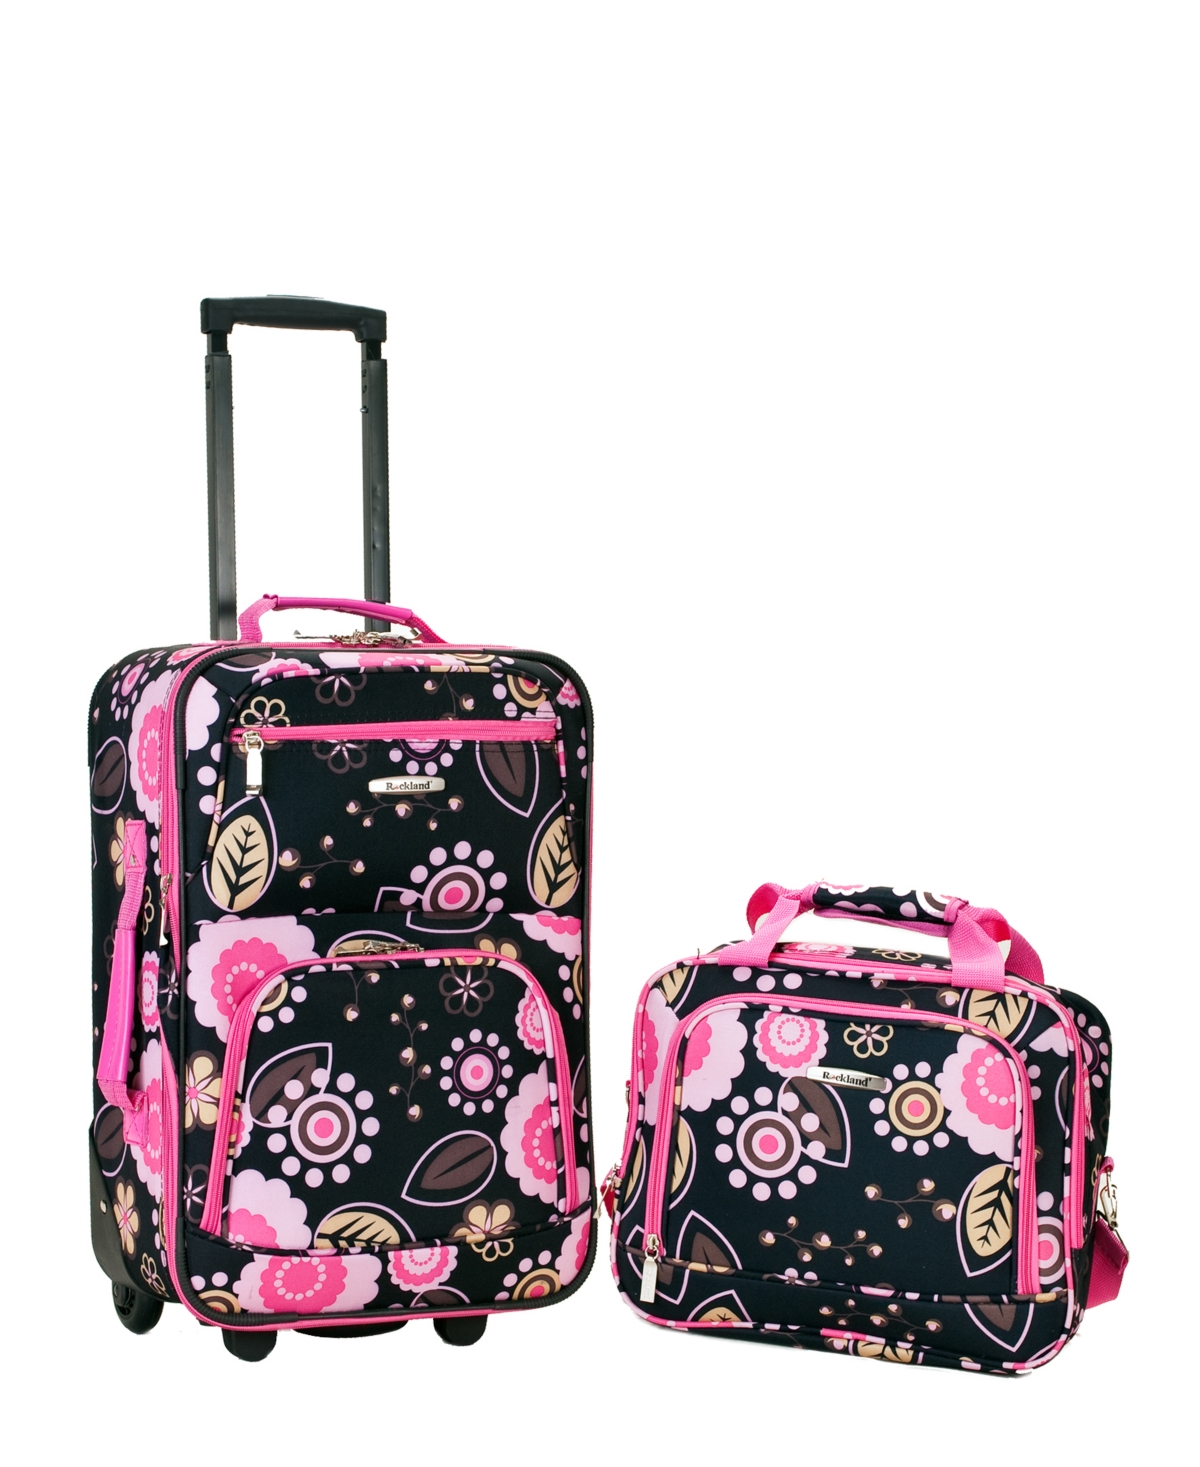 Rockland 2-pc. Pattern Softside Luggage Set In Black  Pink Floral